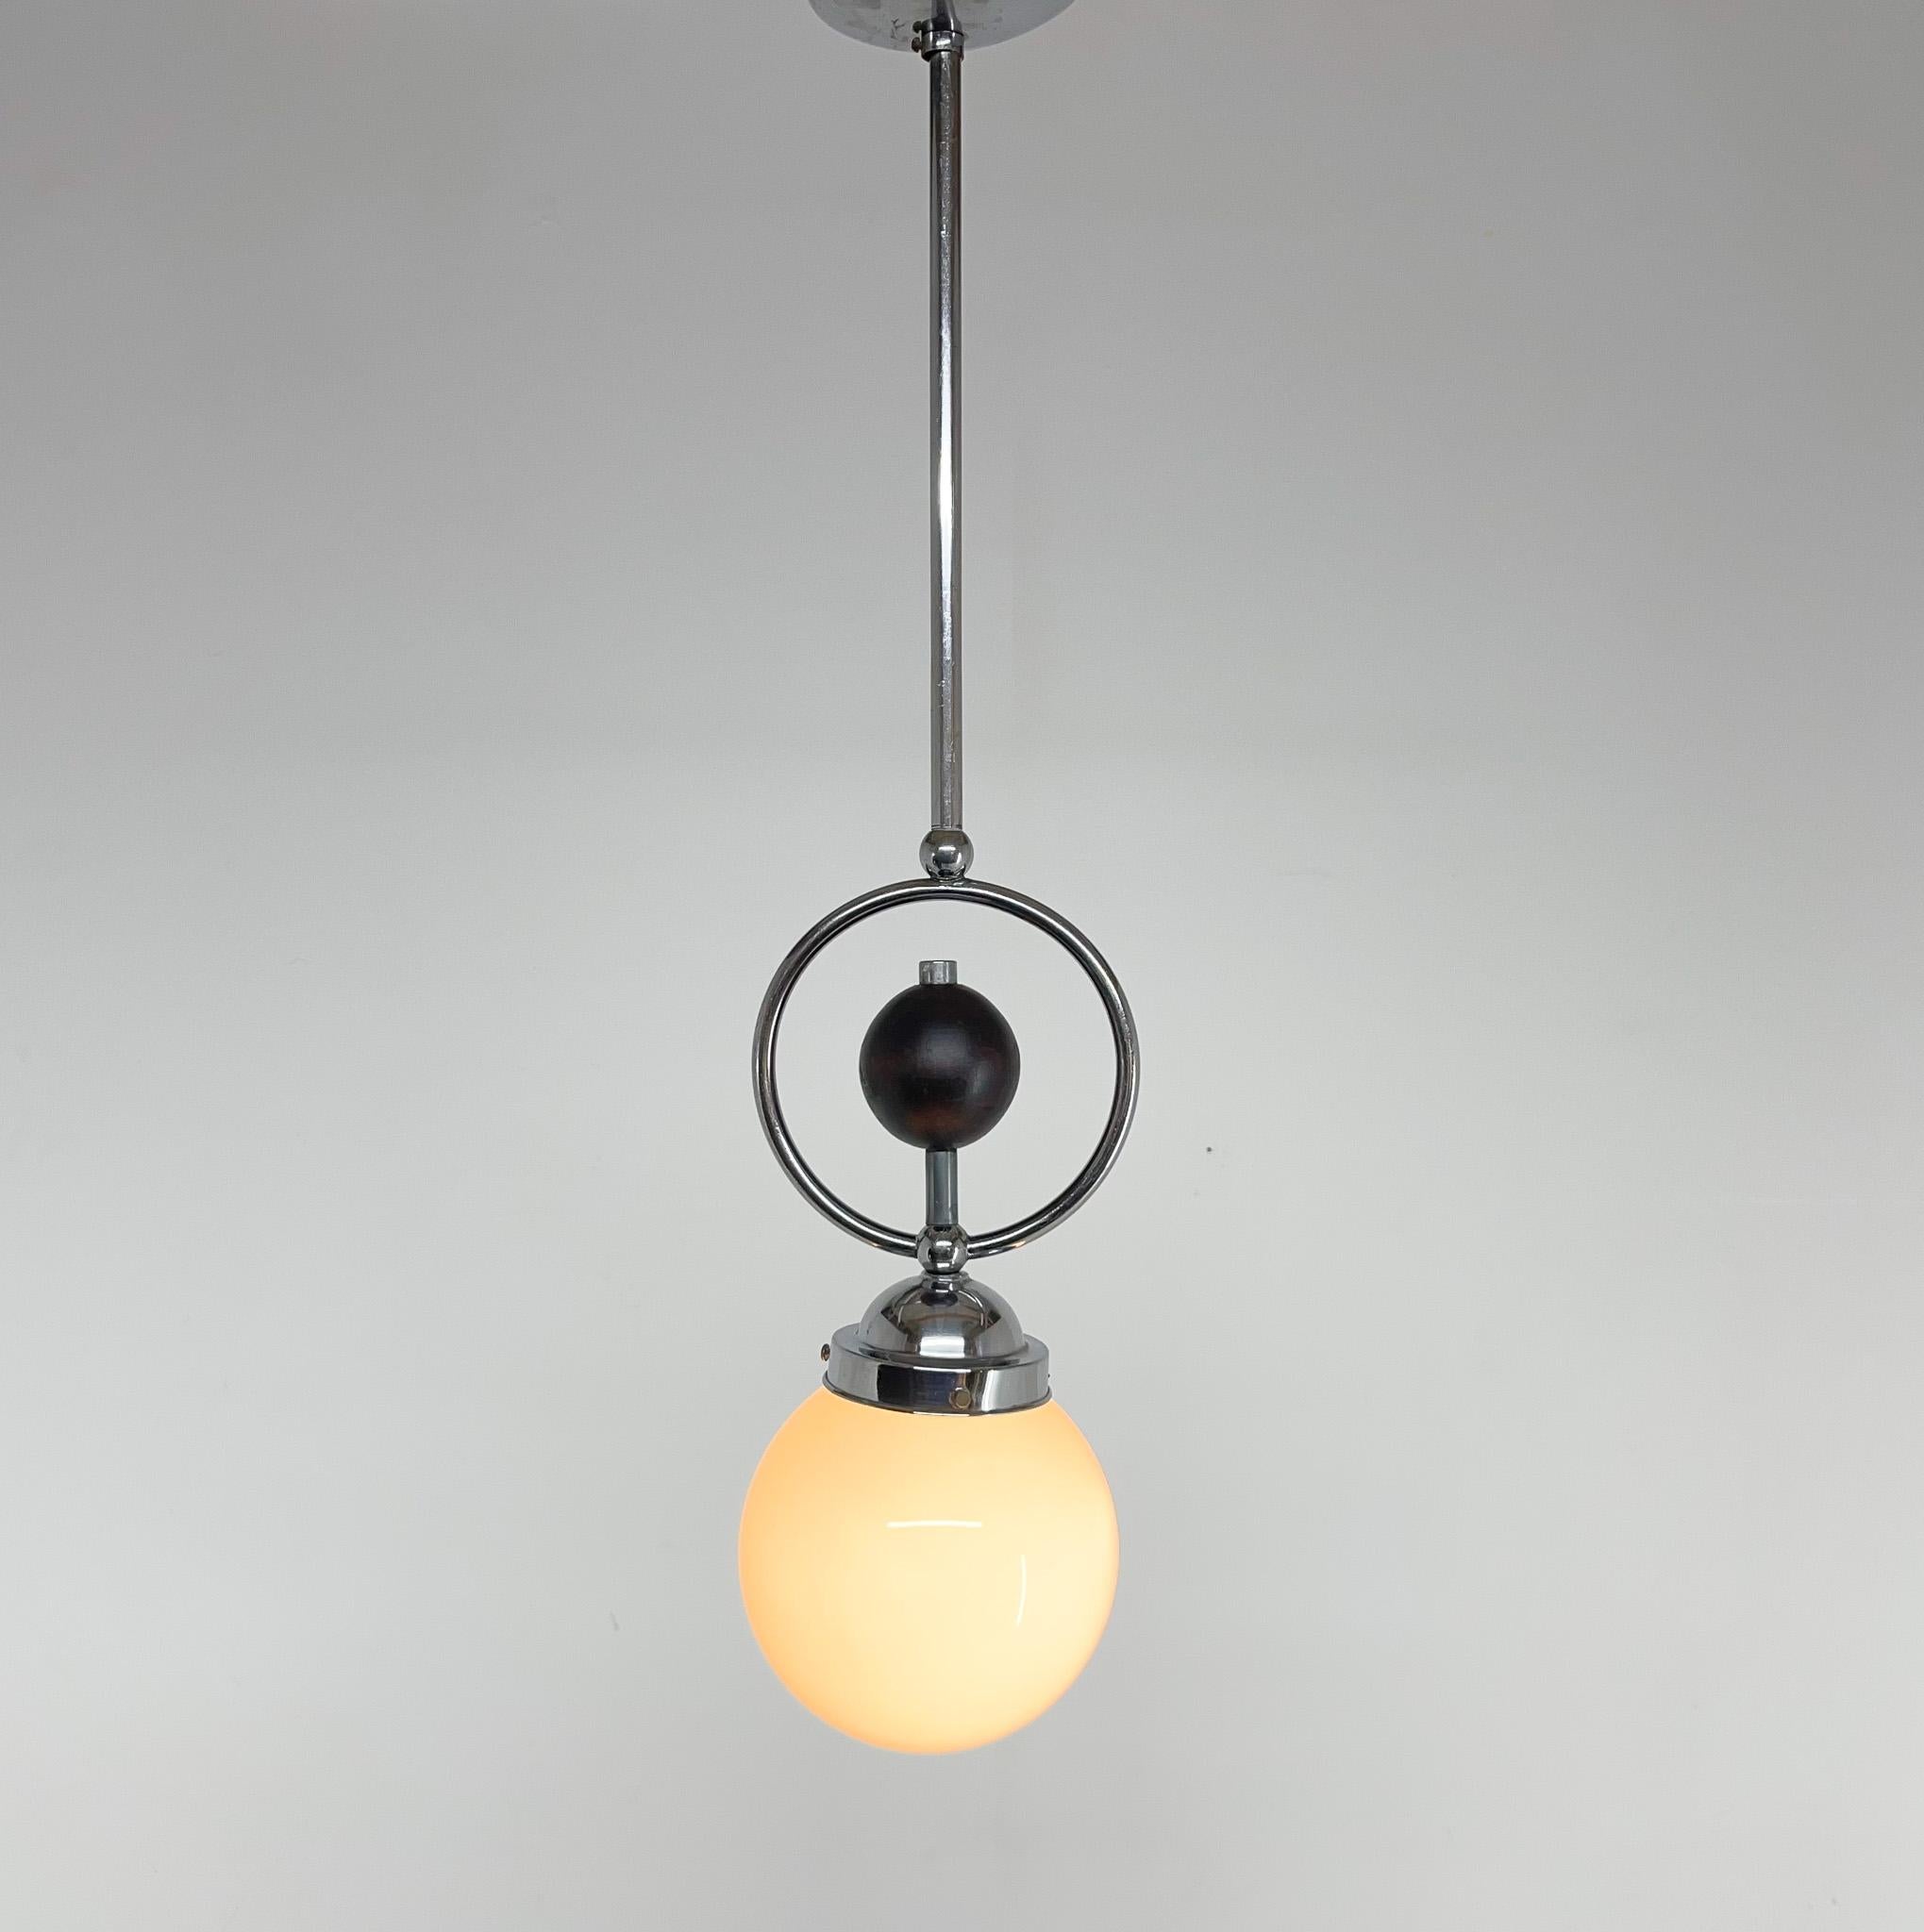 Art deco chrome and milk glass pendant light with a wooden decoration. Made in the early 1930's in Czechoslovakia.